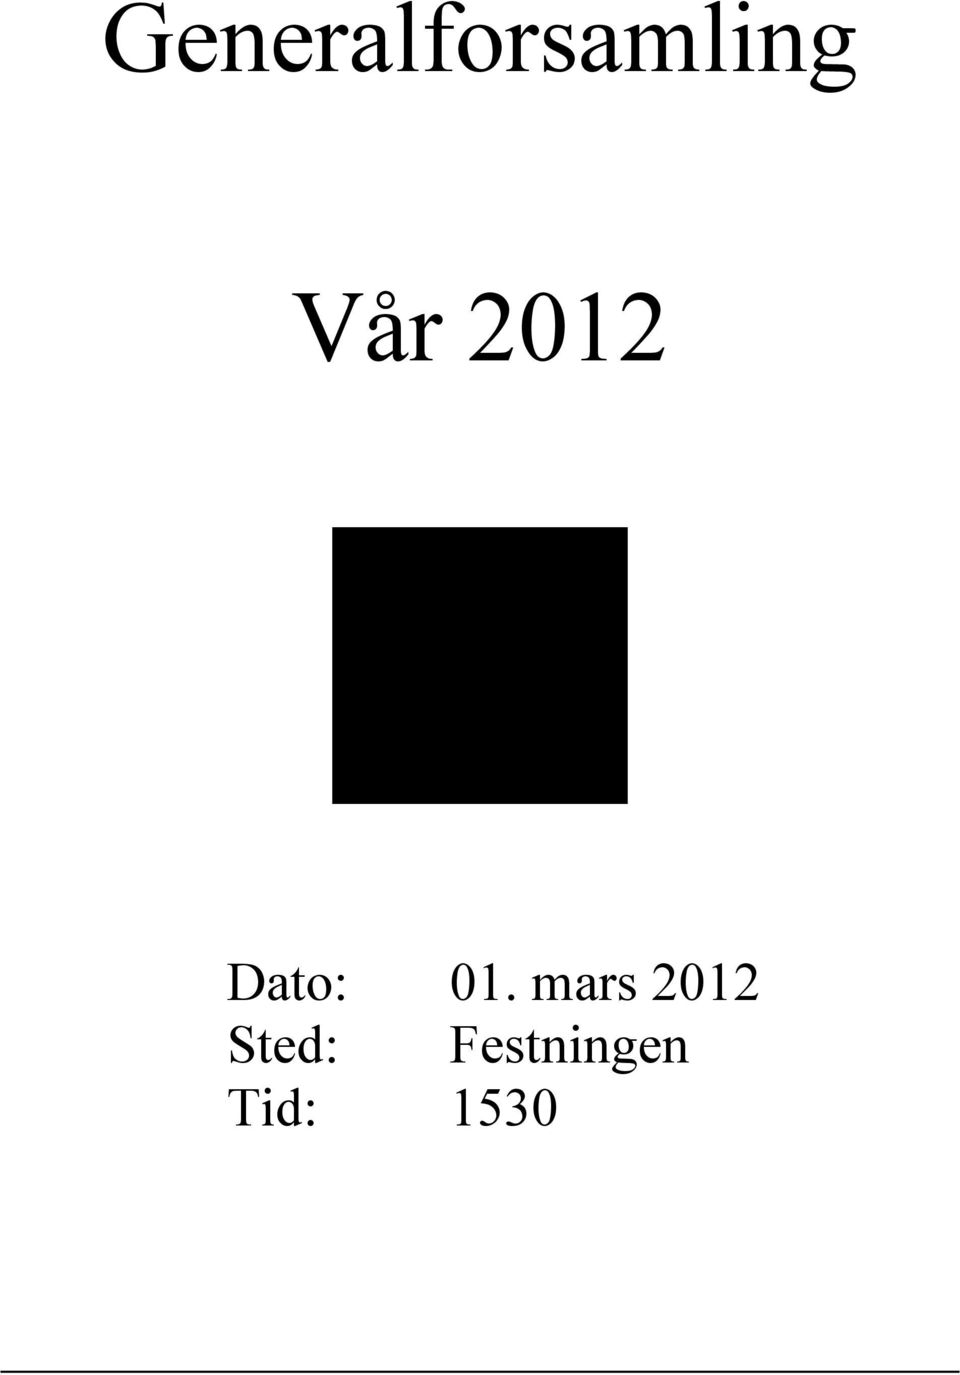 mars 2012 Sted: